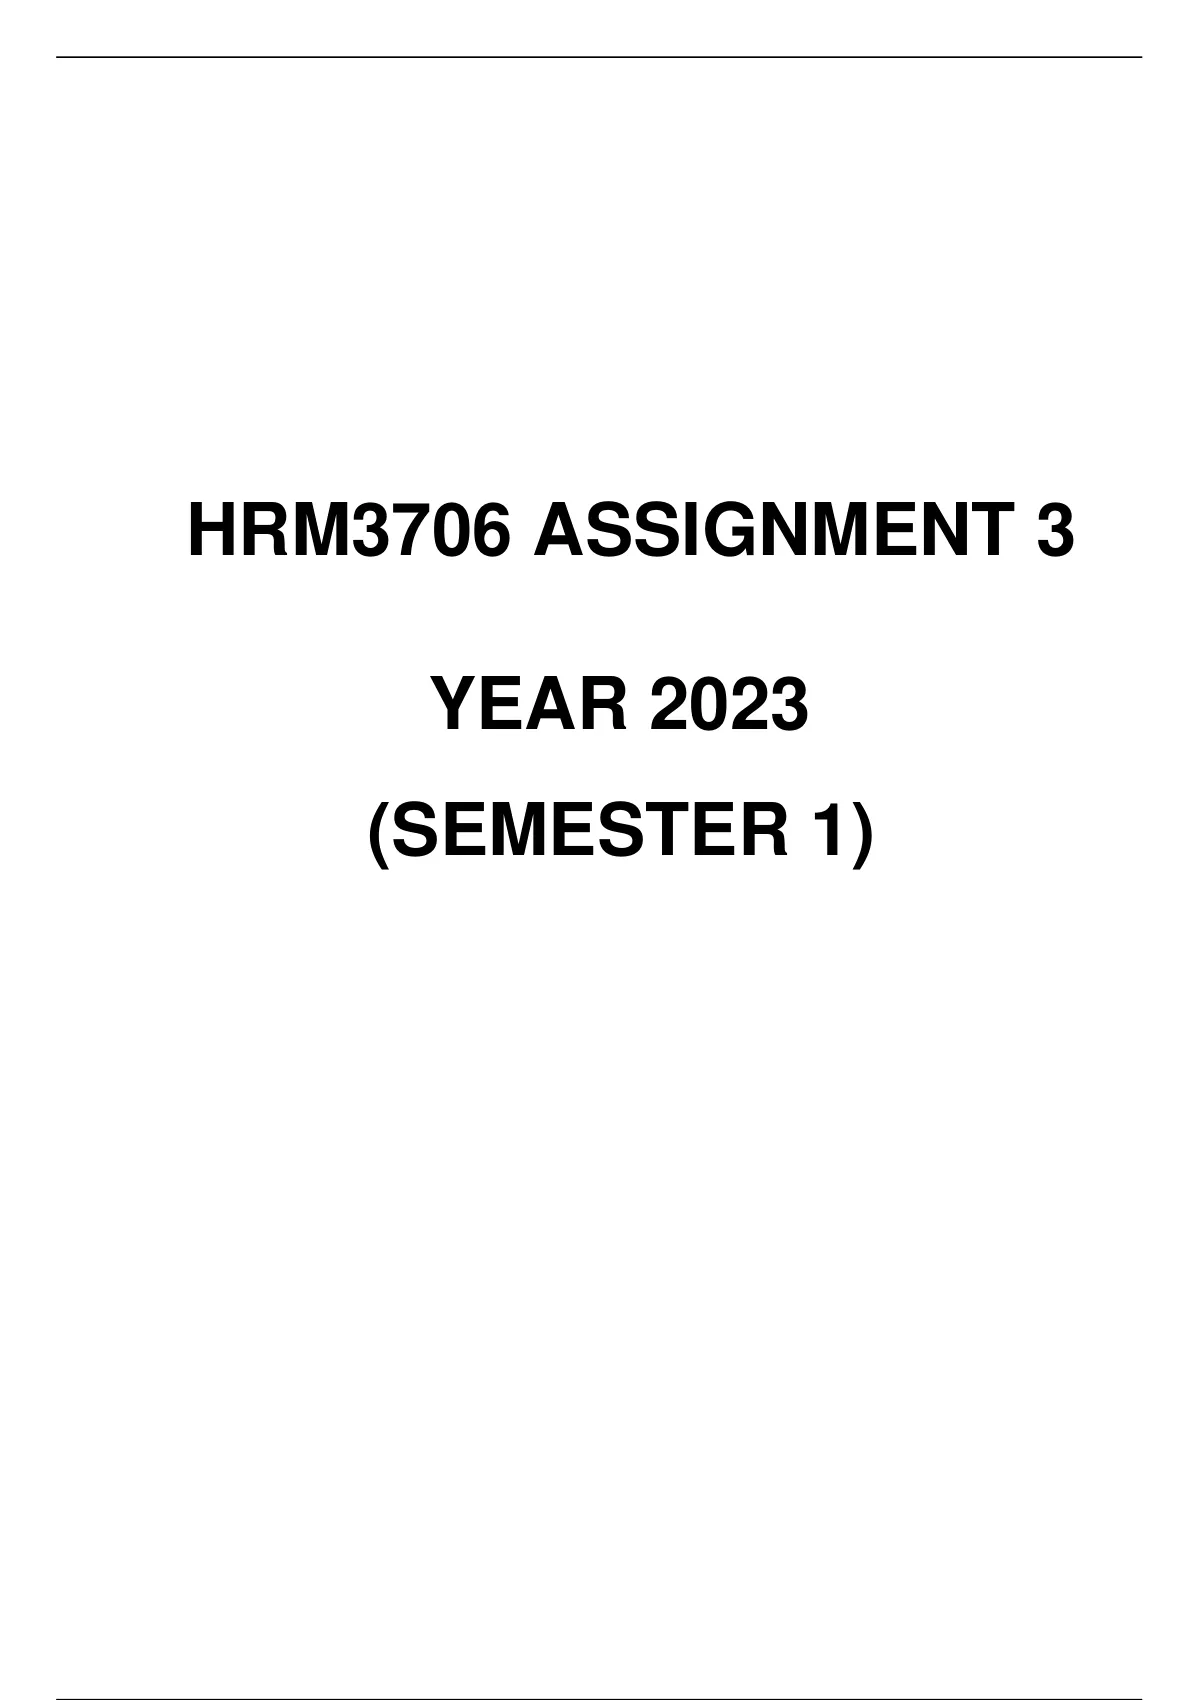 hrm3706 assignment 8 answers